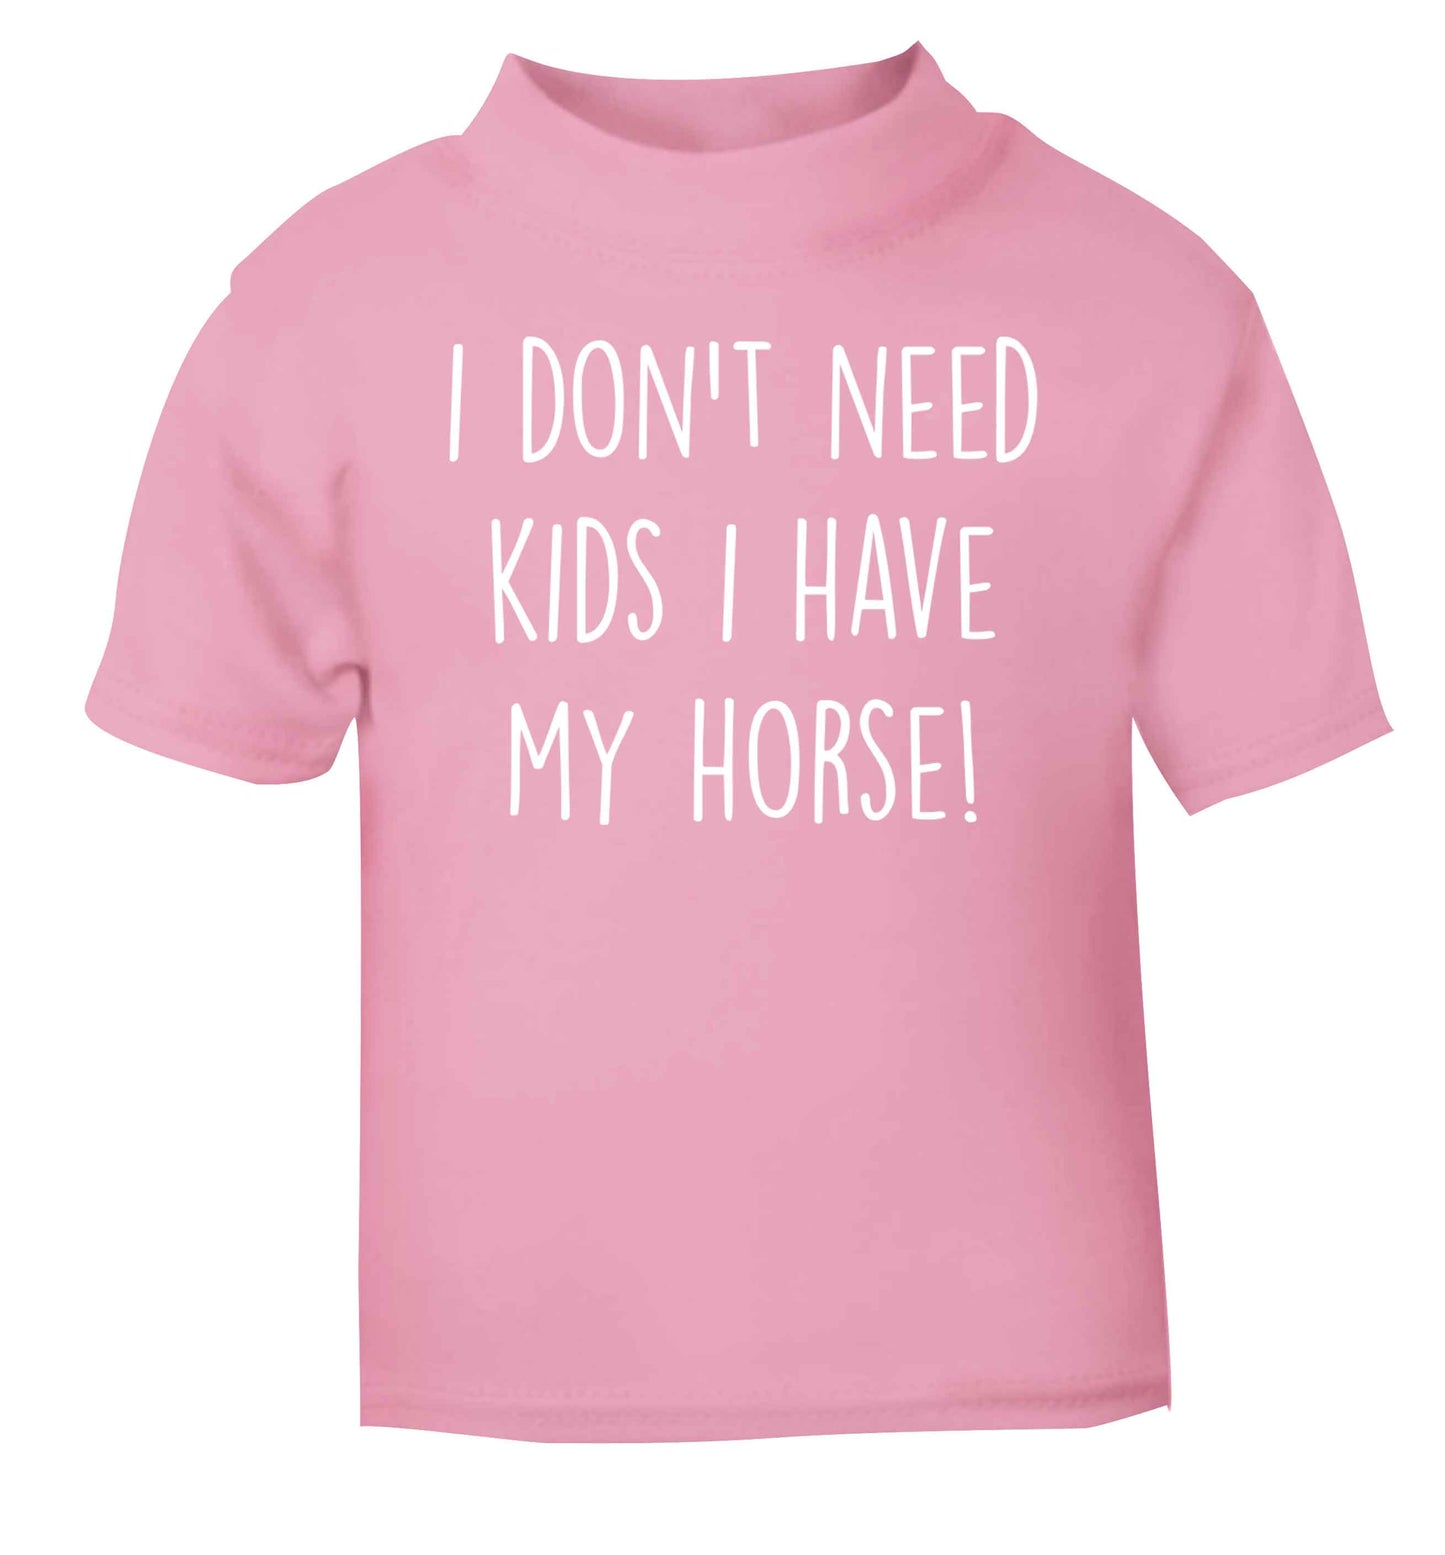 I don't need kids I have my horse light pink baby toddler Tshirt 2 Years